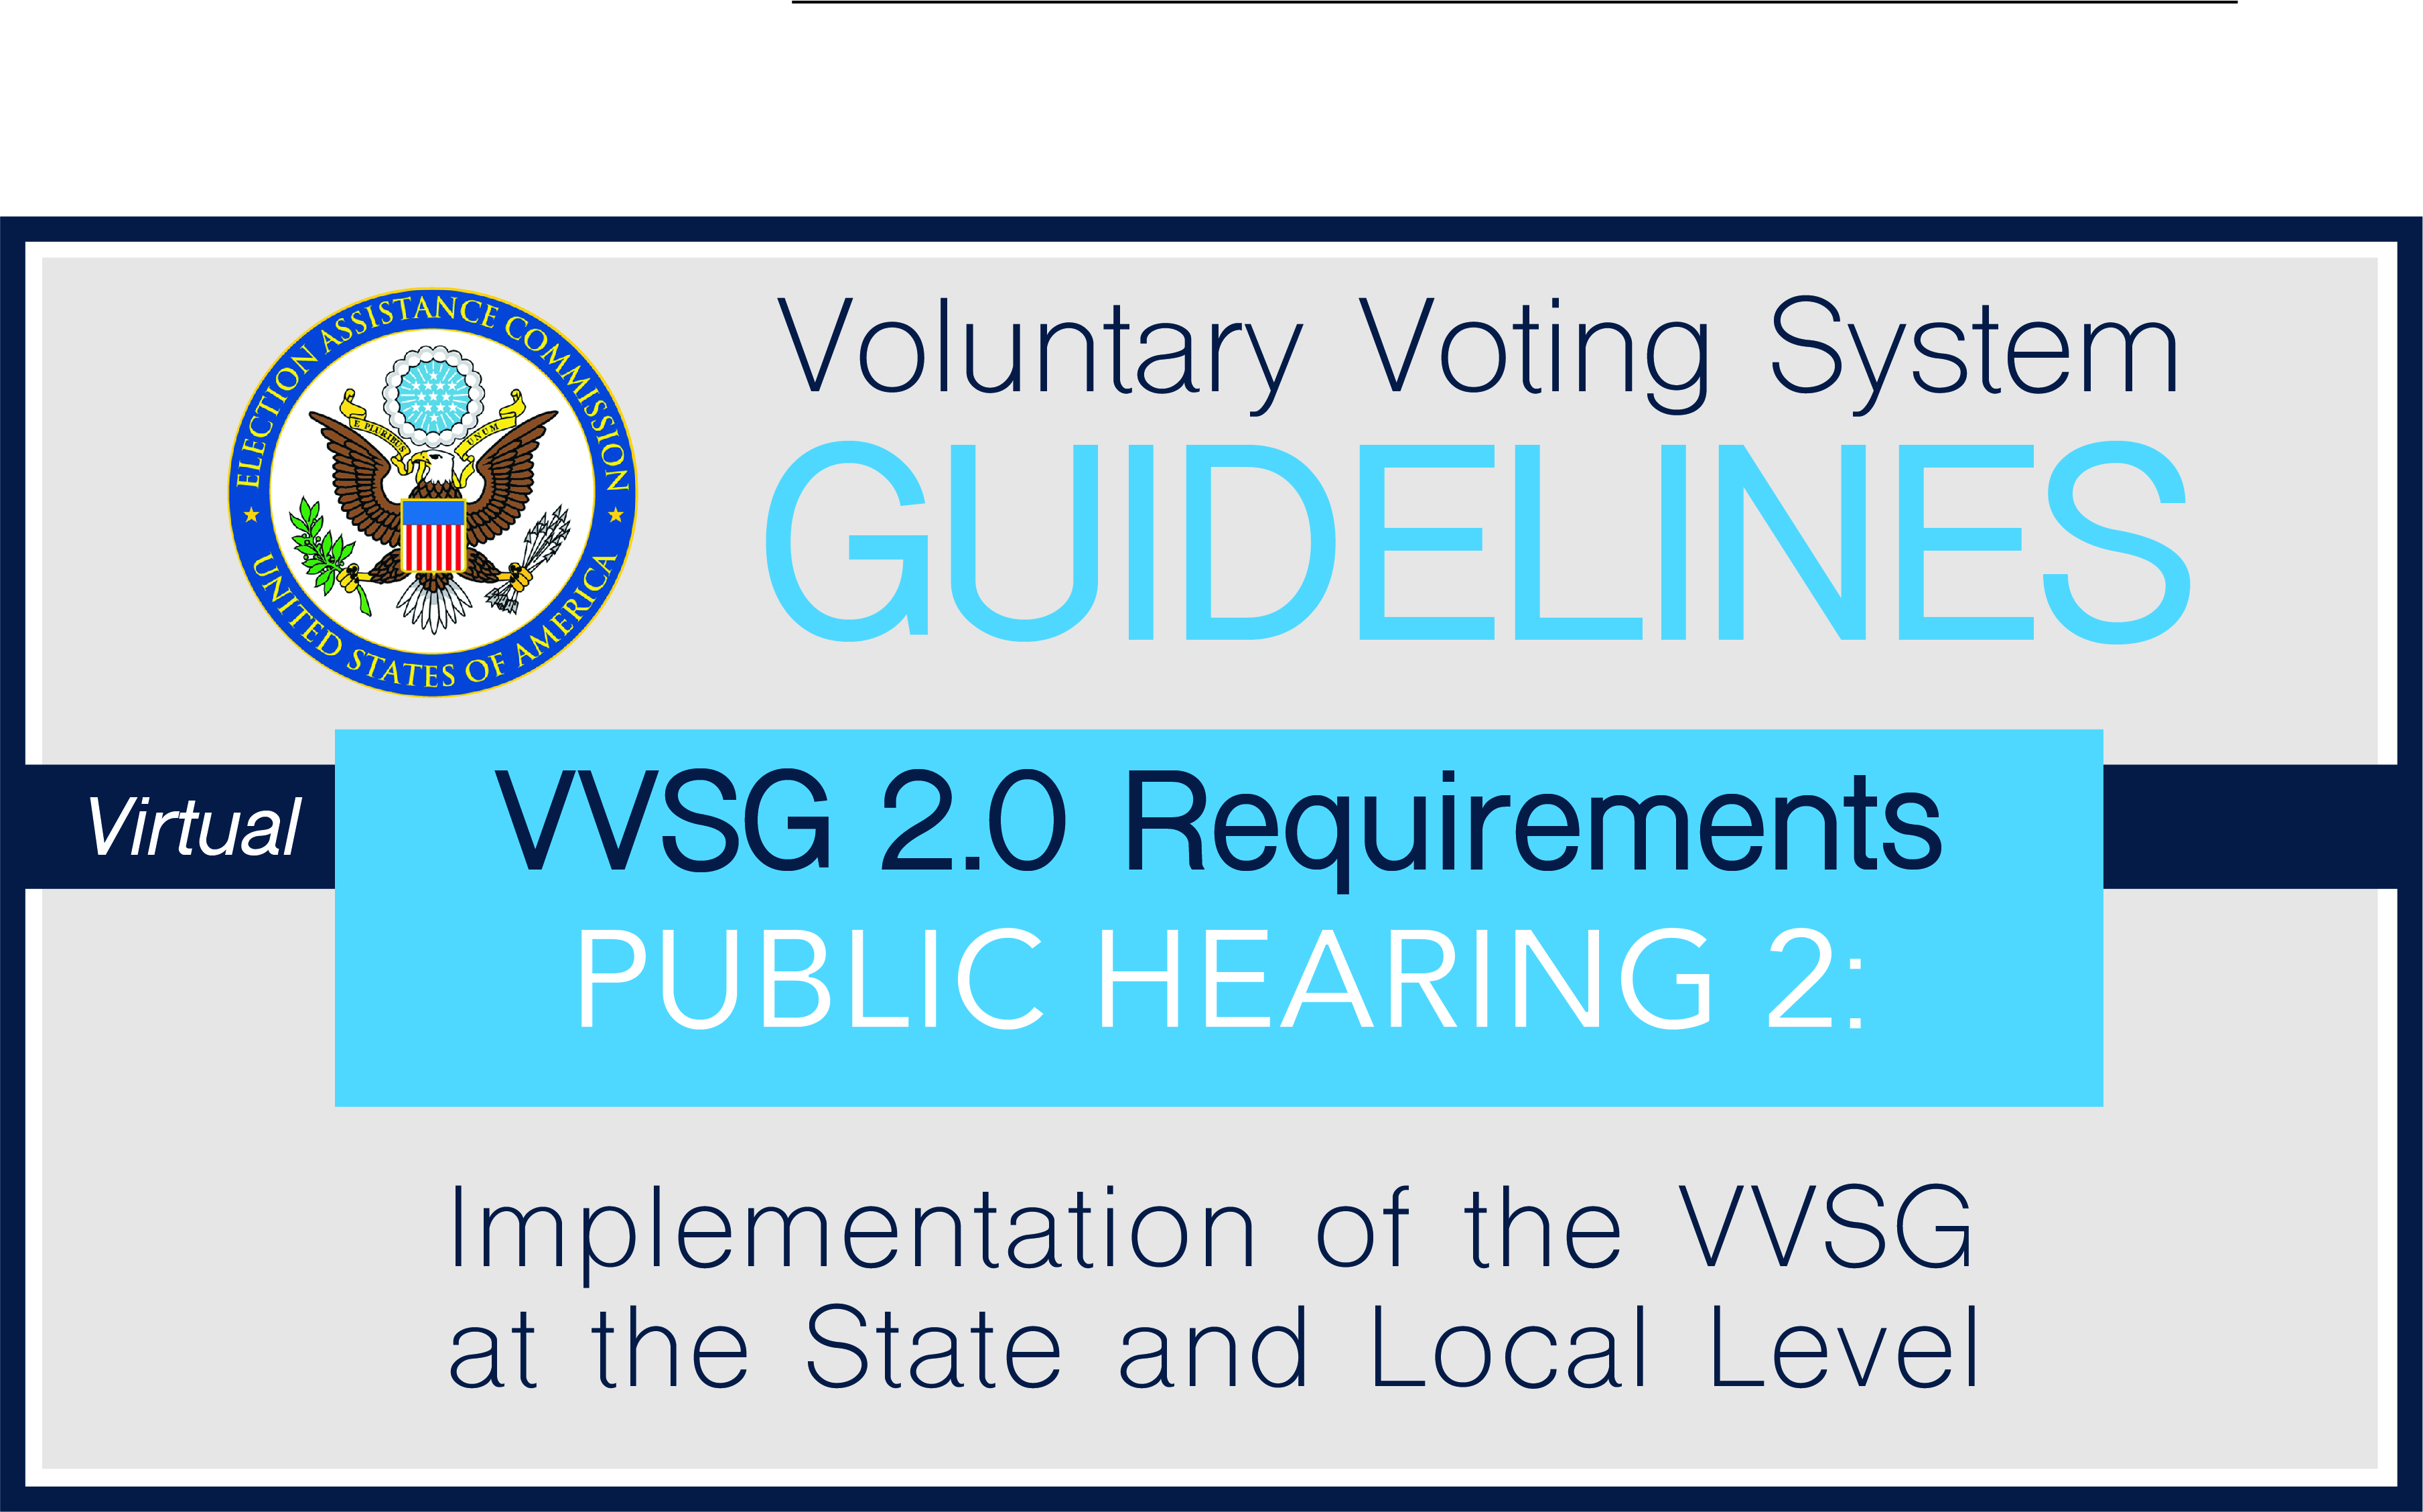 Voluntary Voting System Guidelines VVSG 2.0 Requirements Public Hearing 2: Implementation of the VVSG at the State and Local Level